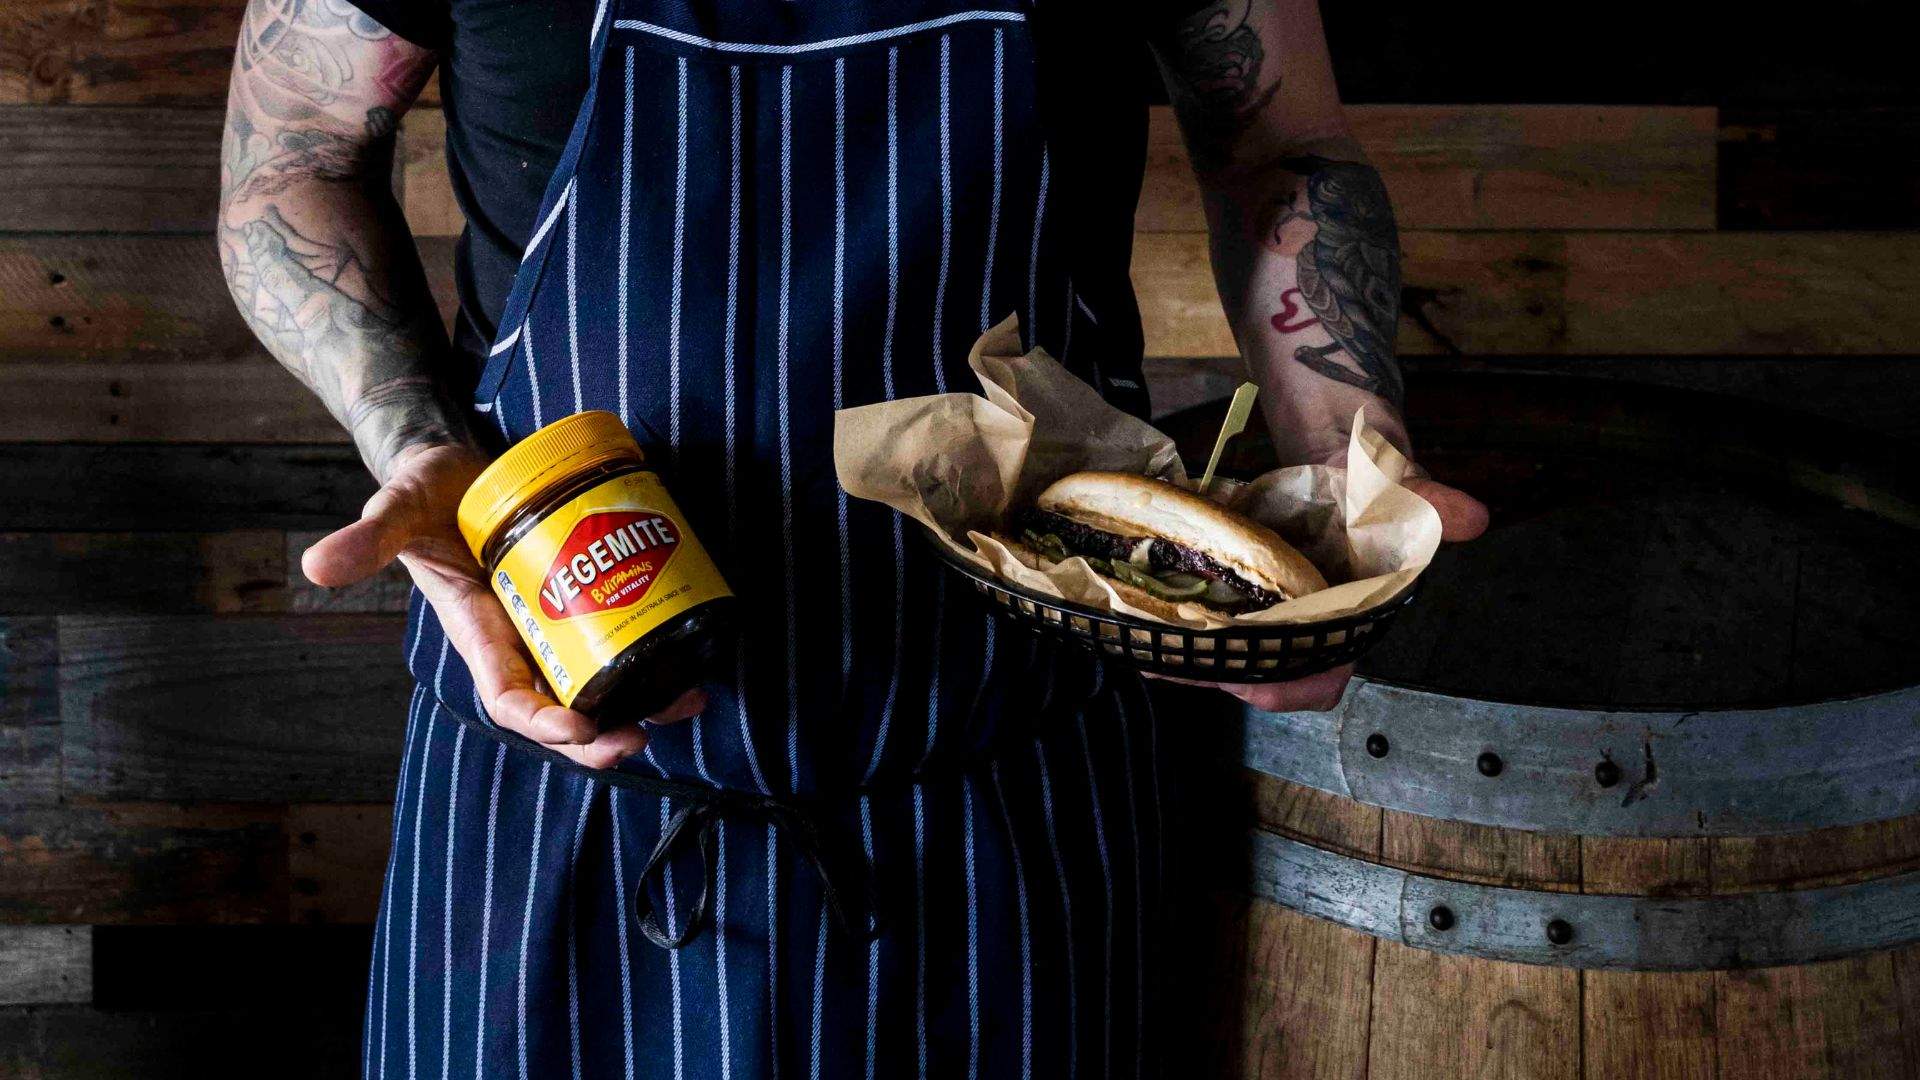 Bad Shepherd's American Barbecue Menu Is Getting an Aussie Makeover for Vegemite's 100th Birthday